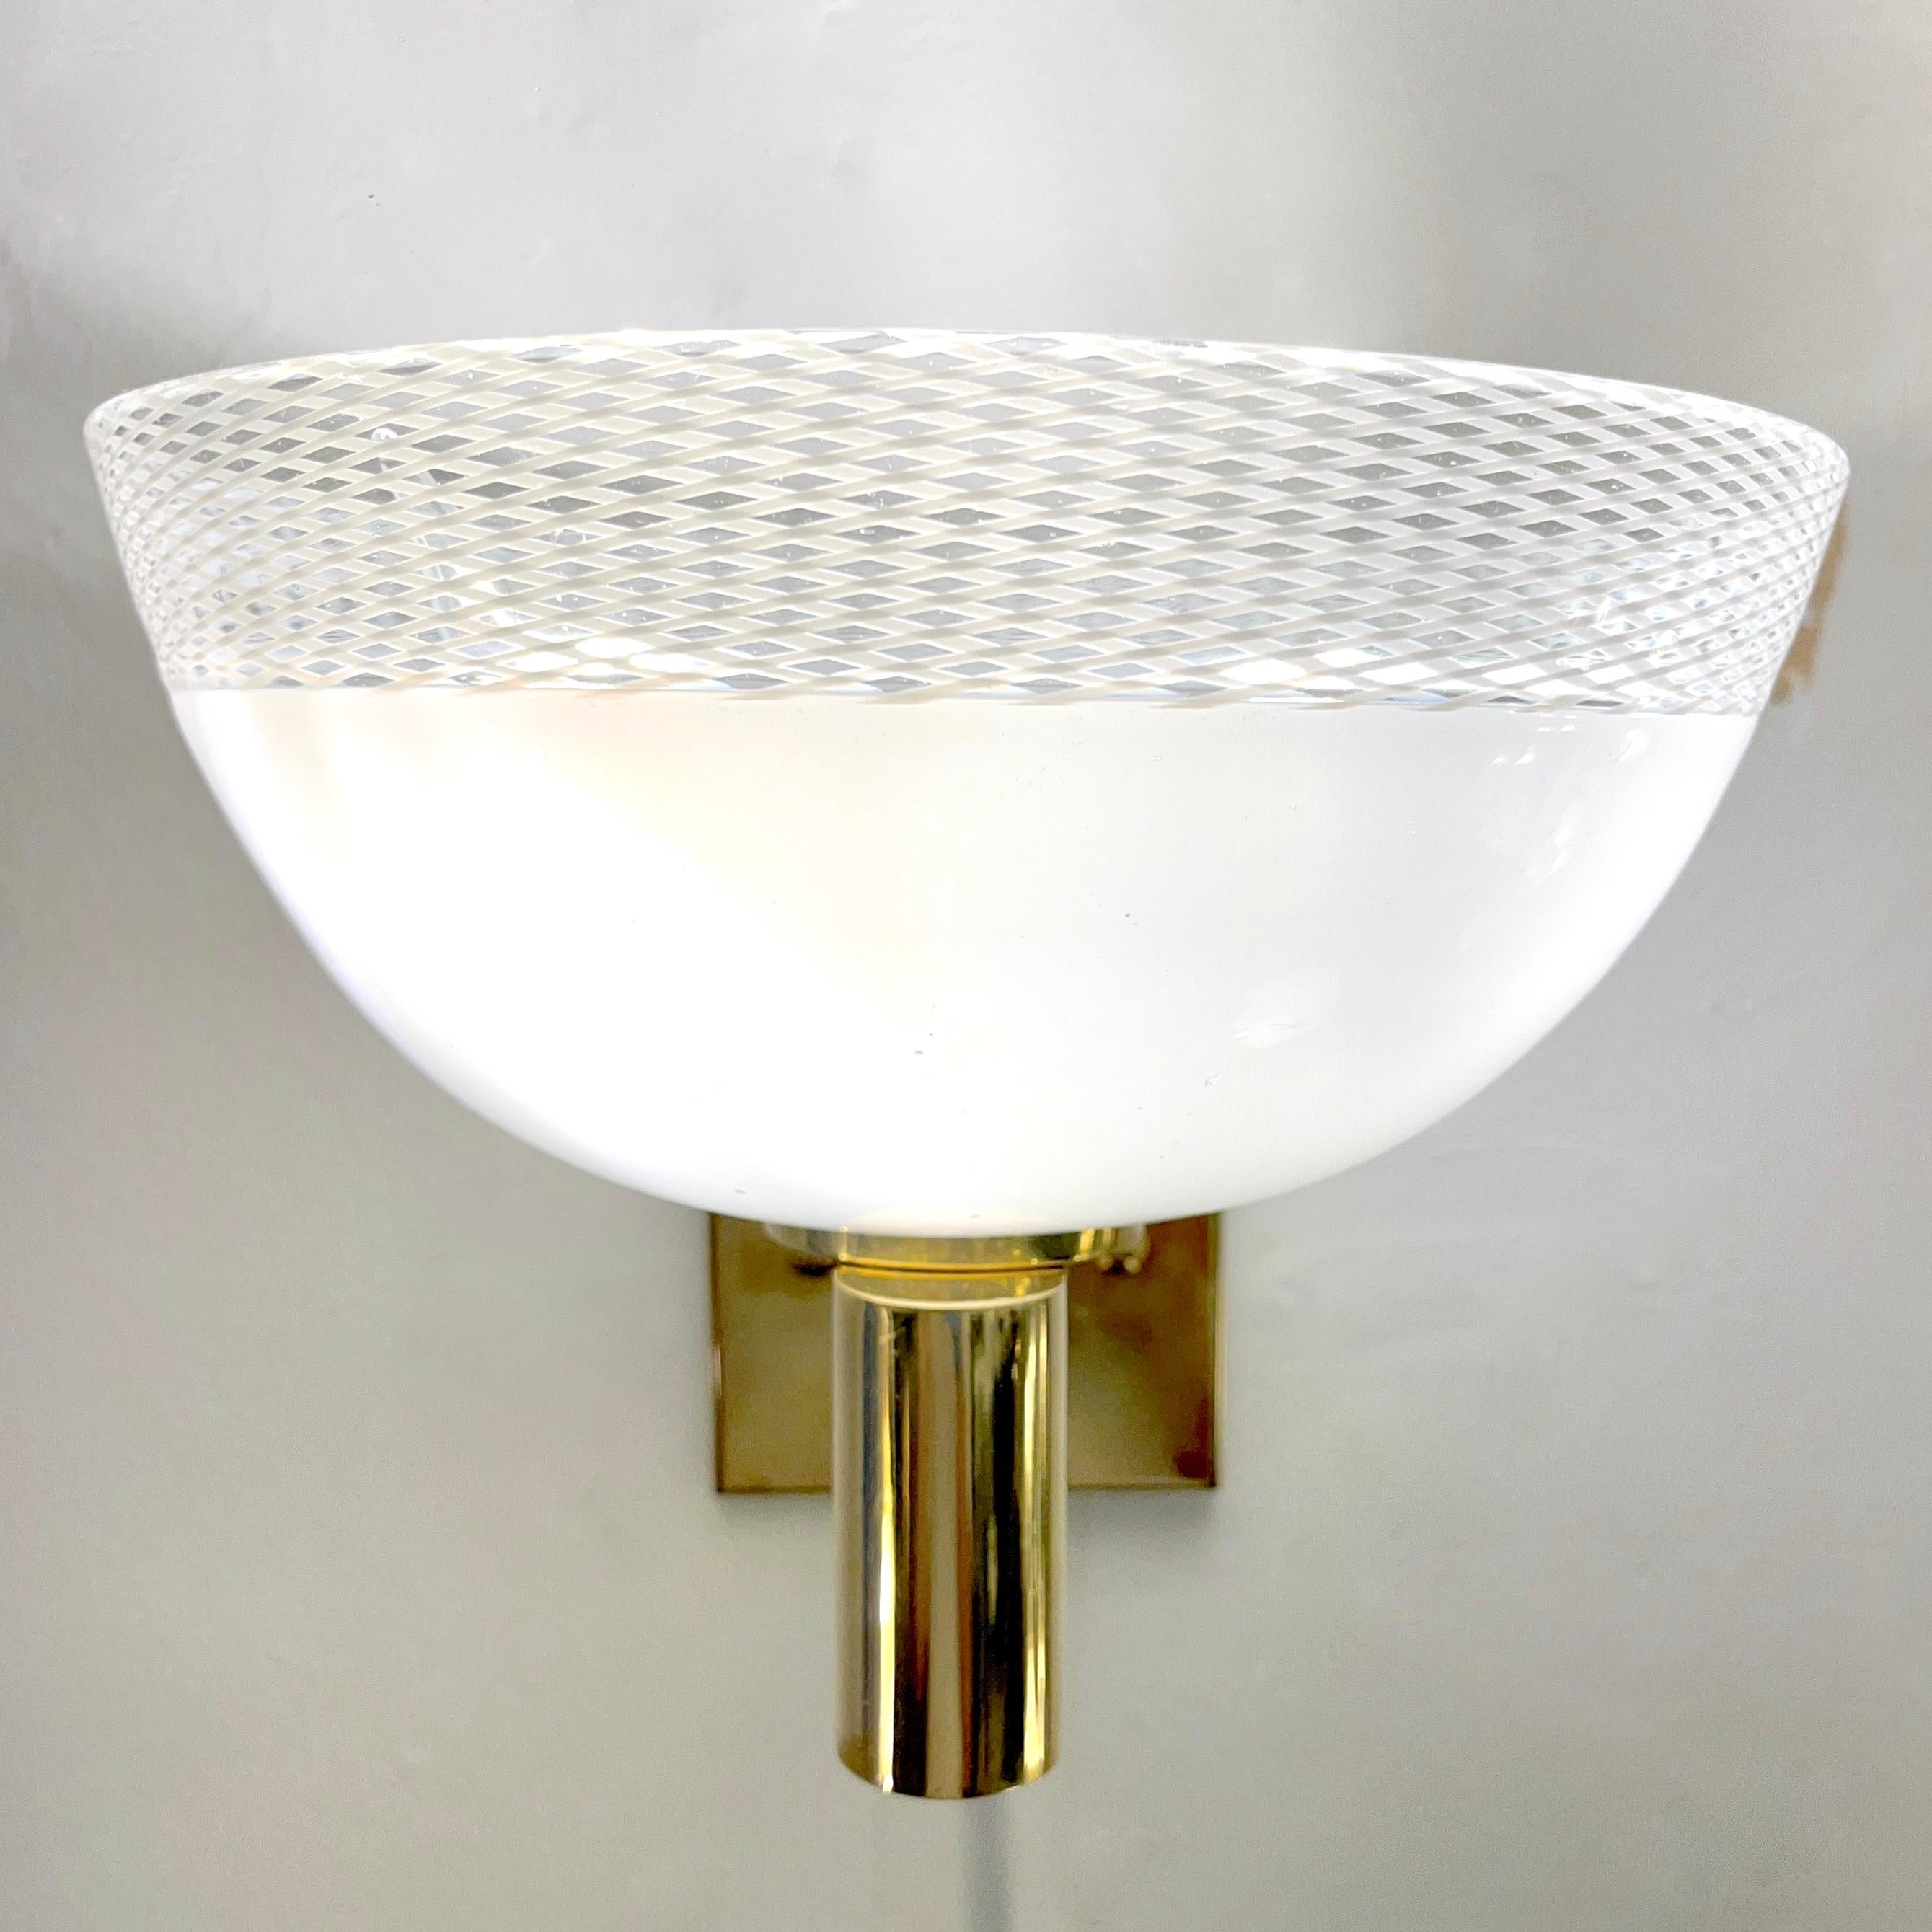 Mid-Century Modern Venetian sconces of organic design with Hollywood glamour, a vintage Art Deco creation in the style of Venini, circa 1970s, entirely handcrafted in Italy on Murano Island. The half-moon bowls in high-quality white blown Murano